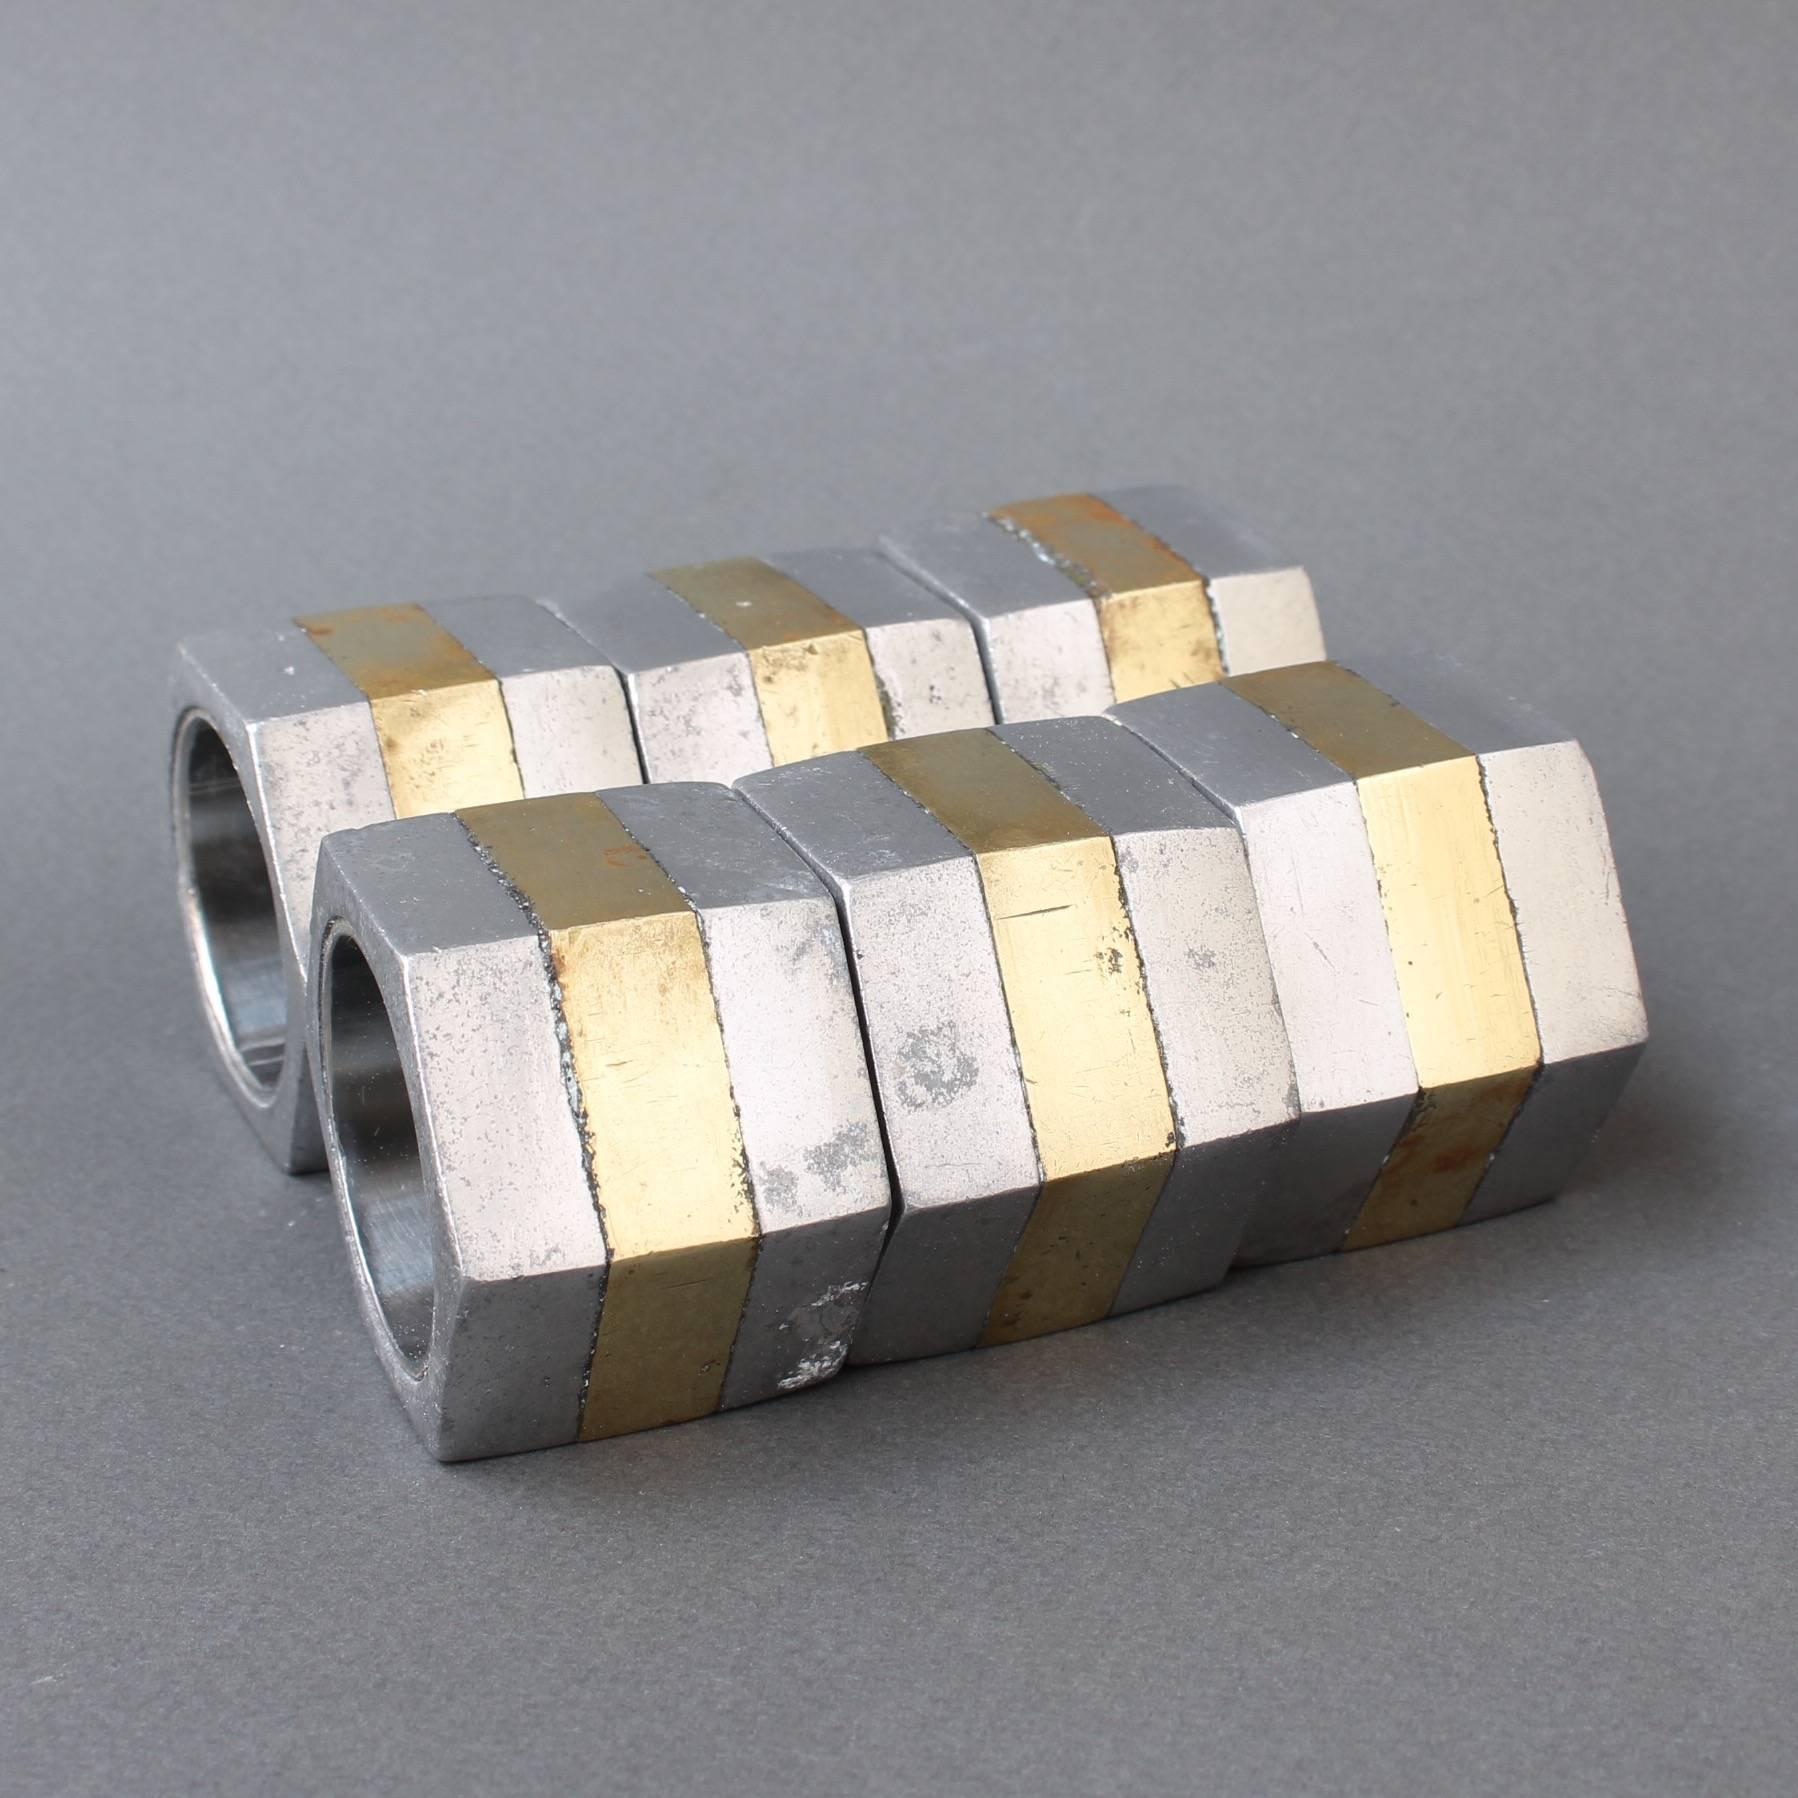 Six brutalist aluminium and brass napkin rings by David Marshall, circa 1970s. These brutalist style napkin holders are both weighty and tactile. The pieces are in good vintage condition with characterful marks and some evident blemishing consistent